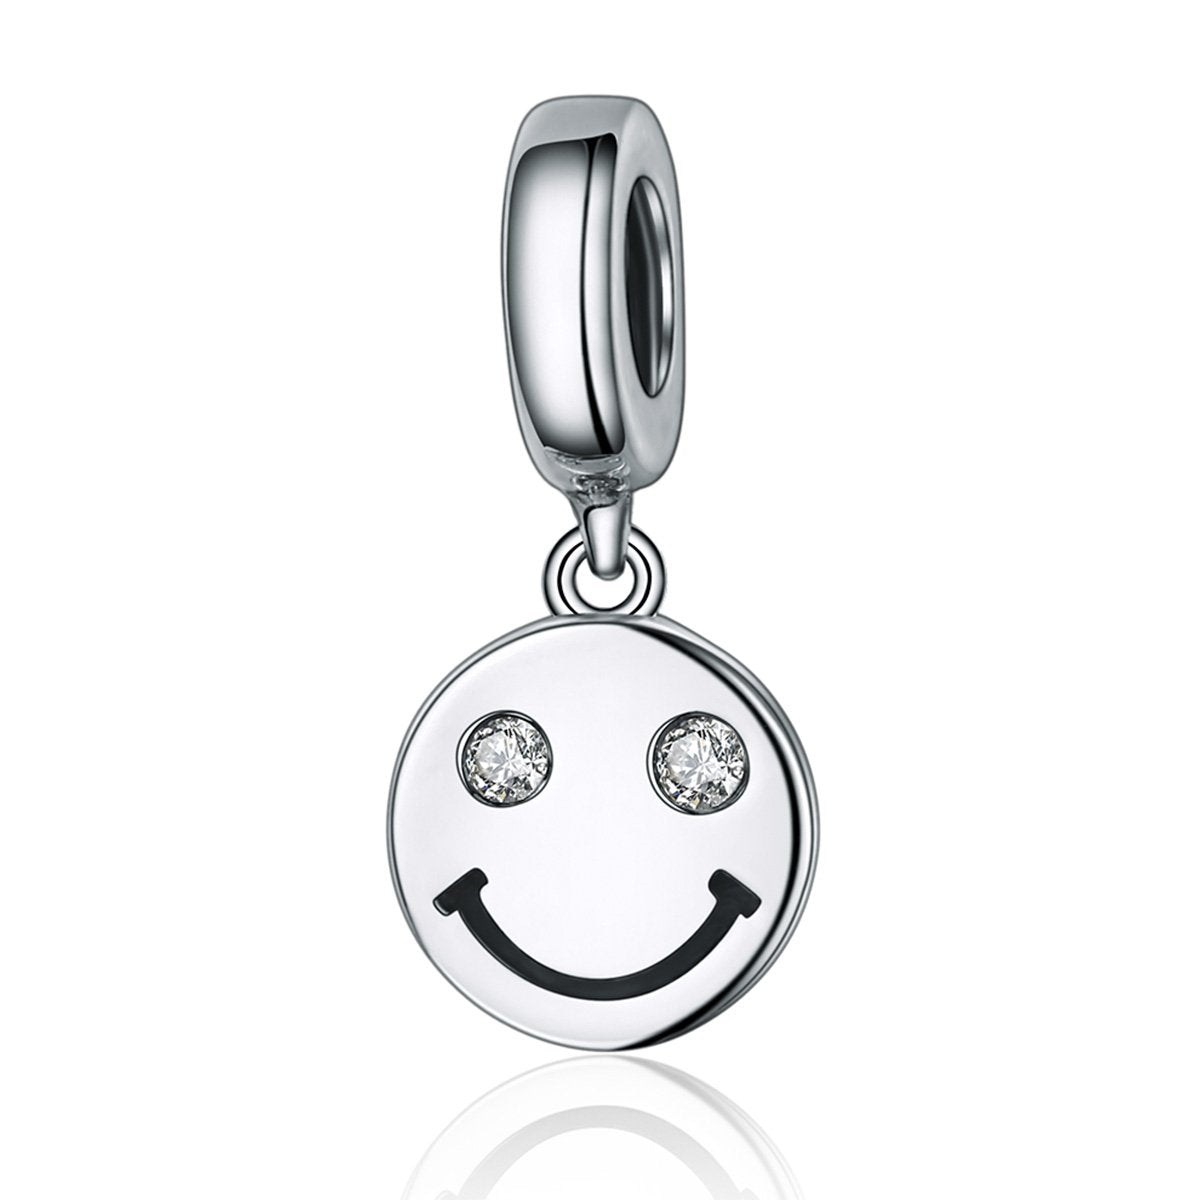 Sterling 925 silver charm the simple smile puls bead pendant fits Pandora charm and European charm bracelet Xaxe.com